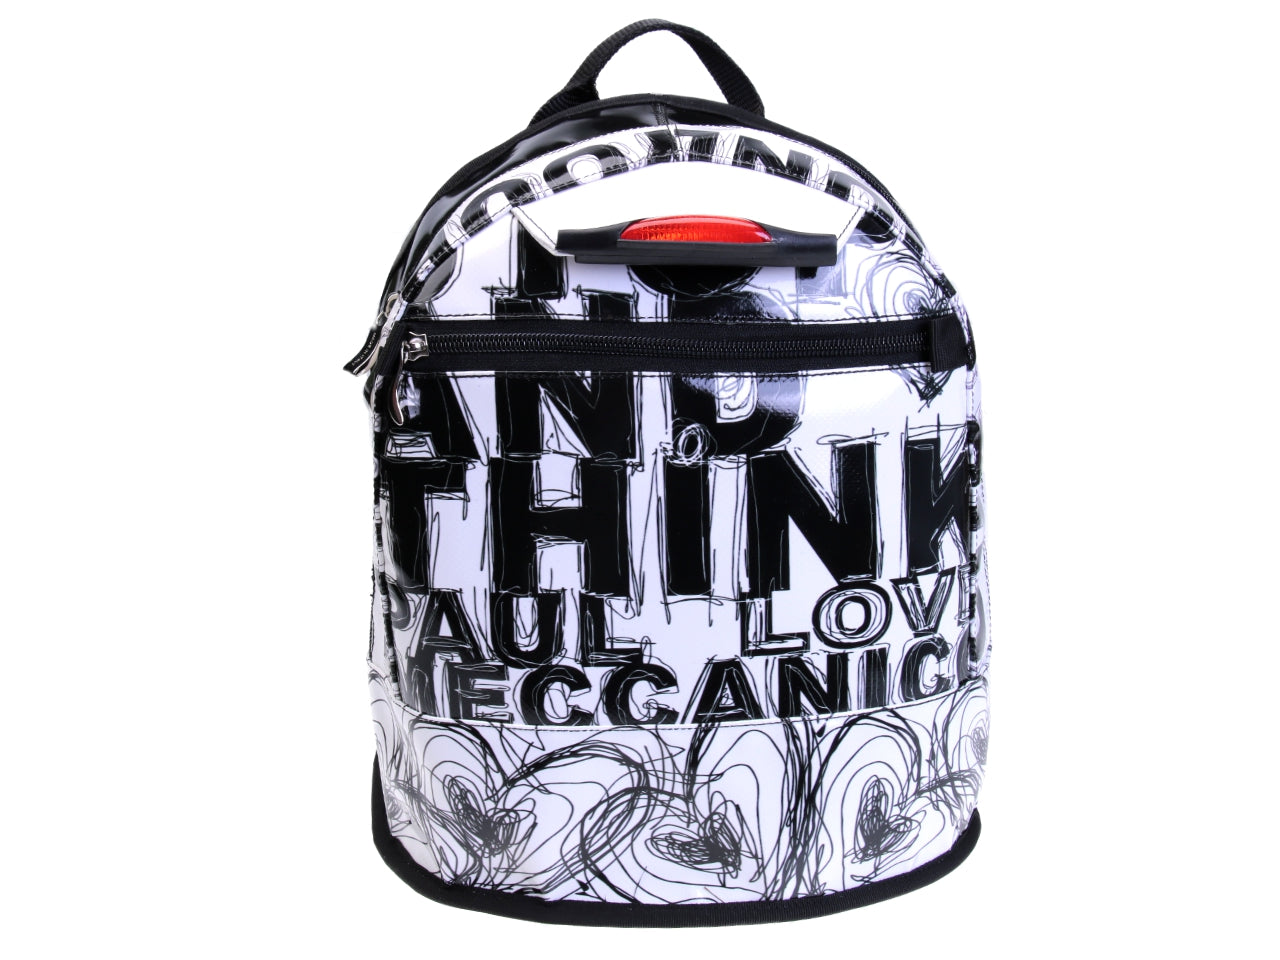 BLACK AND WHITE BACKPACK "STOP AND THINK". MODEL SUPERINO MADE OF LORRY TARPAULIN. - Limited Edition Paul Meccanico